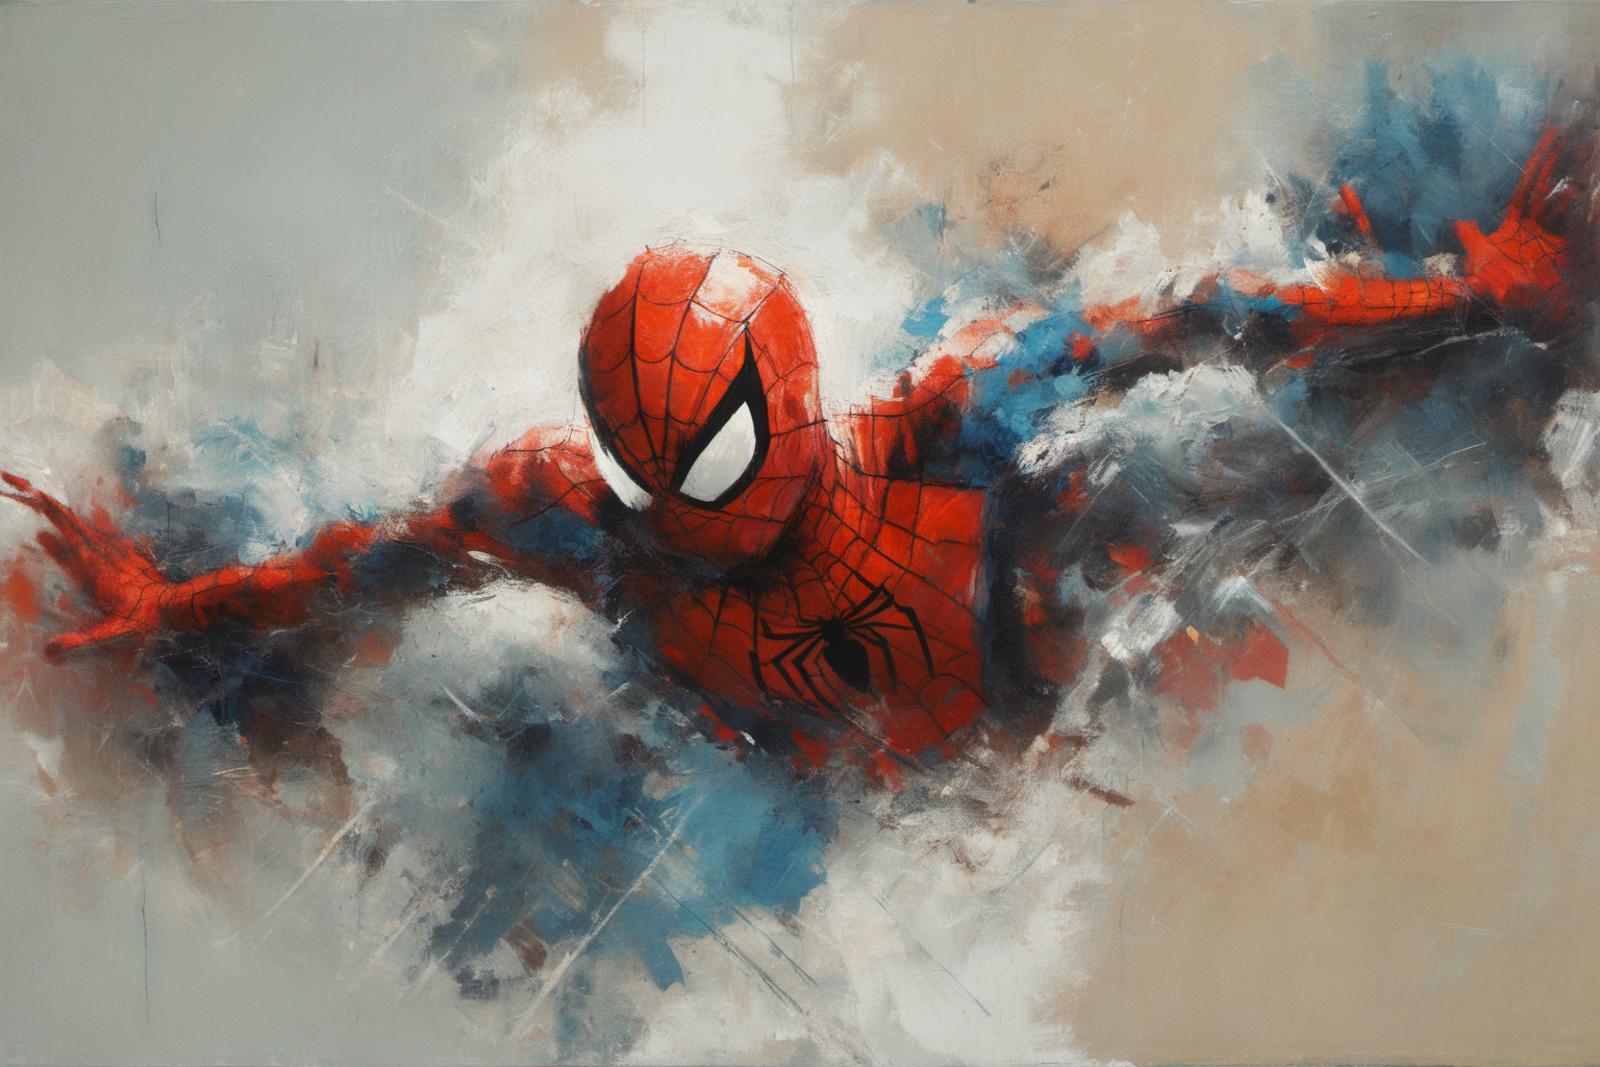 Spiderman Flying through the Air in a Painting with Blue and White Background